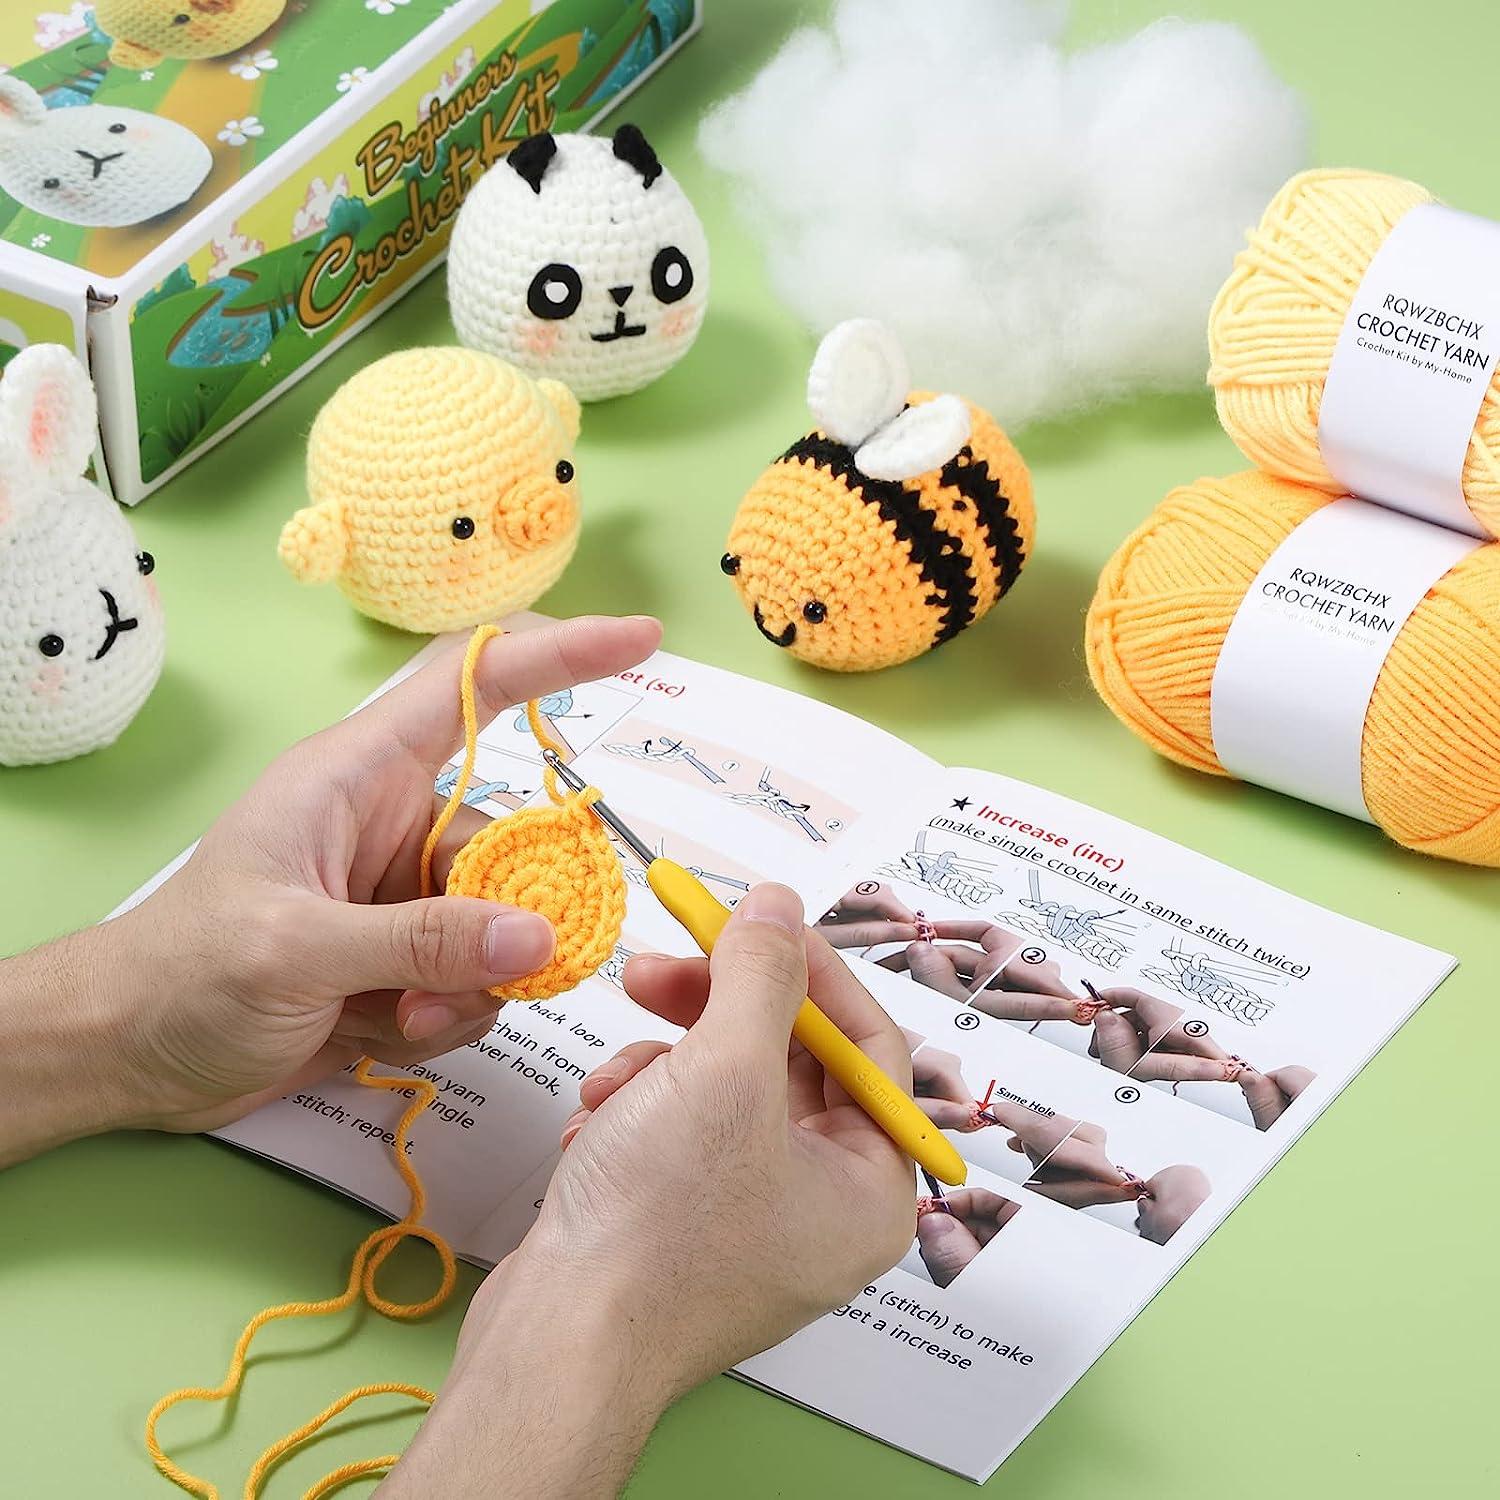 Crochet Kit for Beginners Adults and Kids - Make Amigurumi and